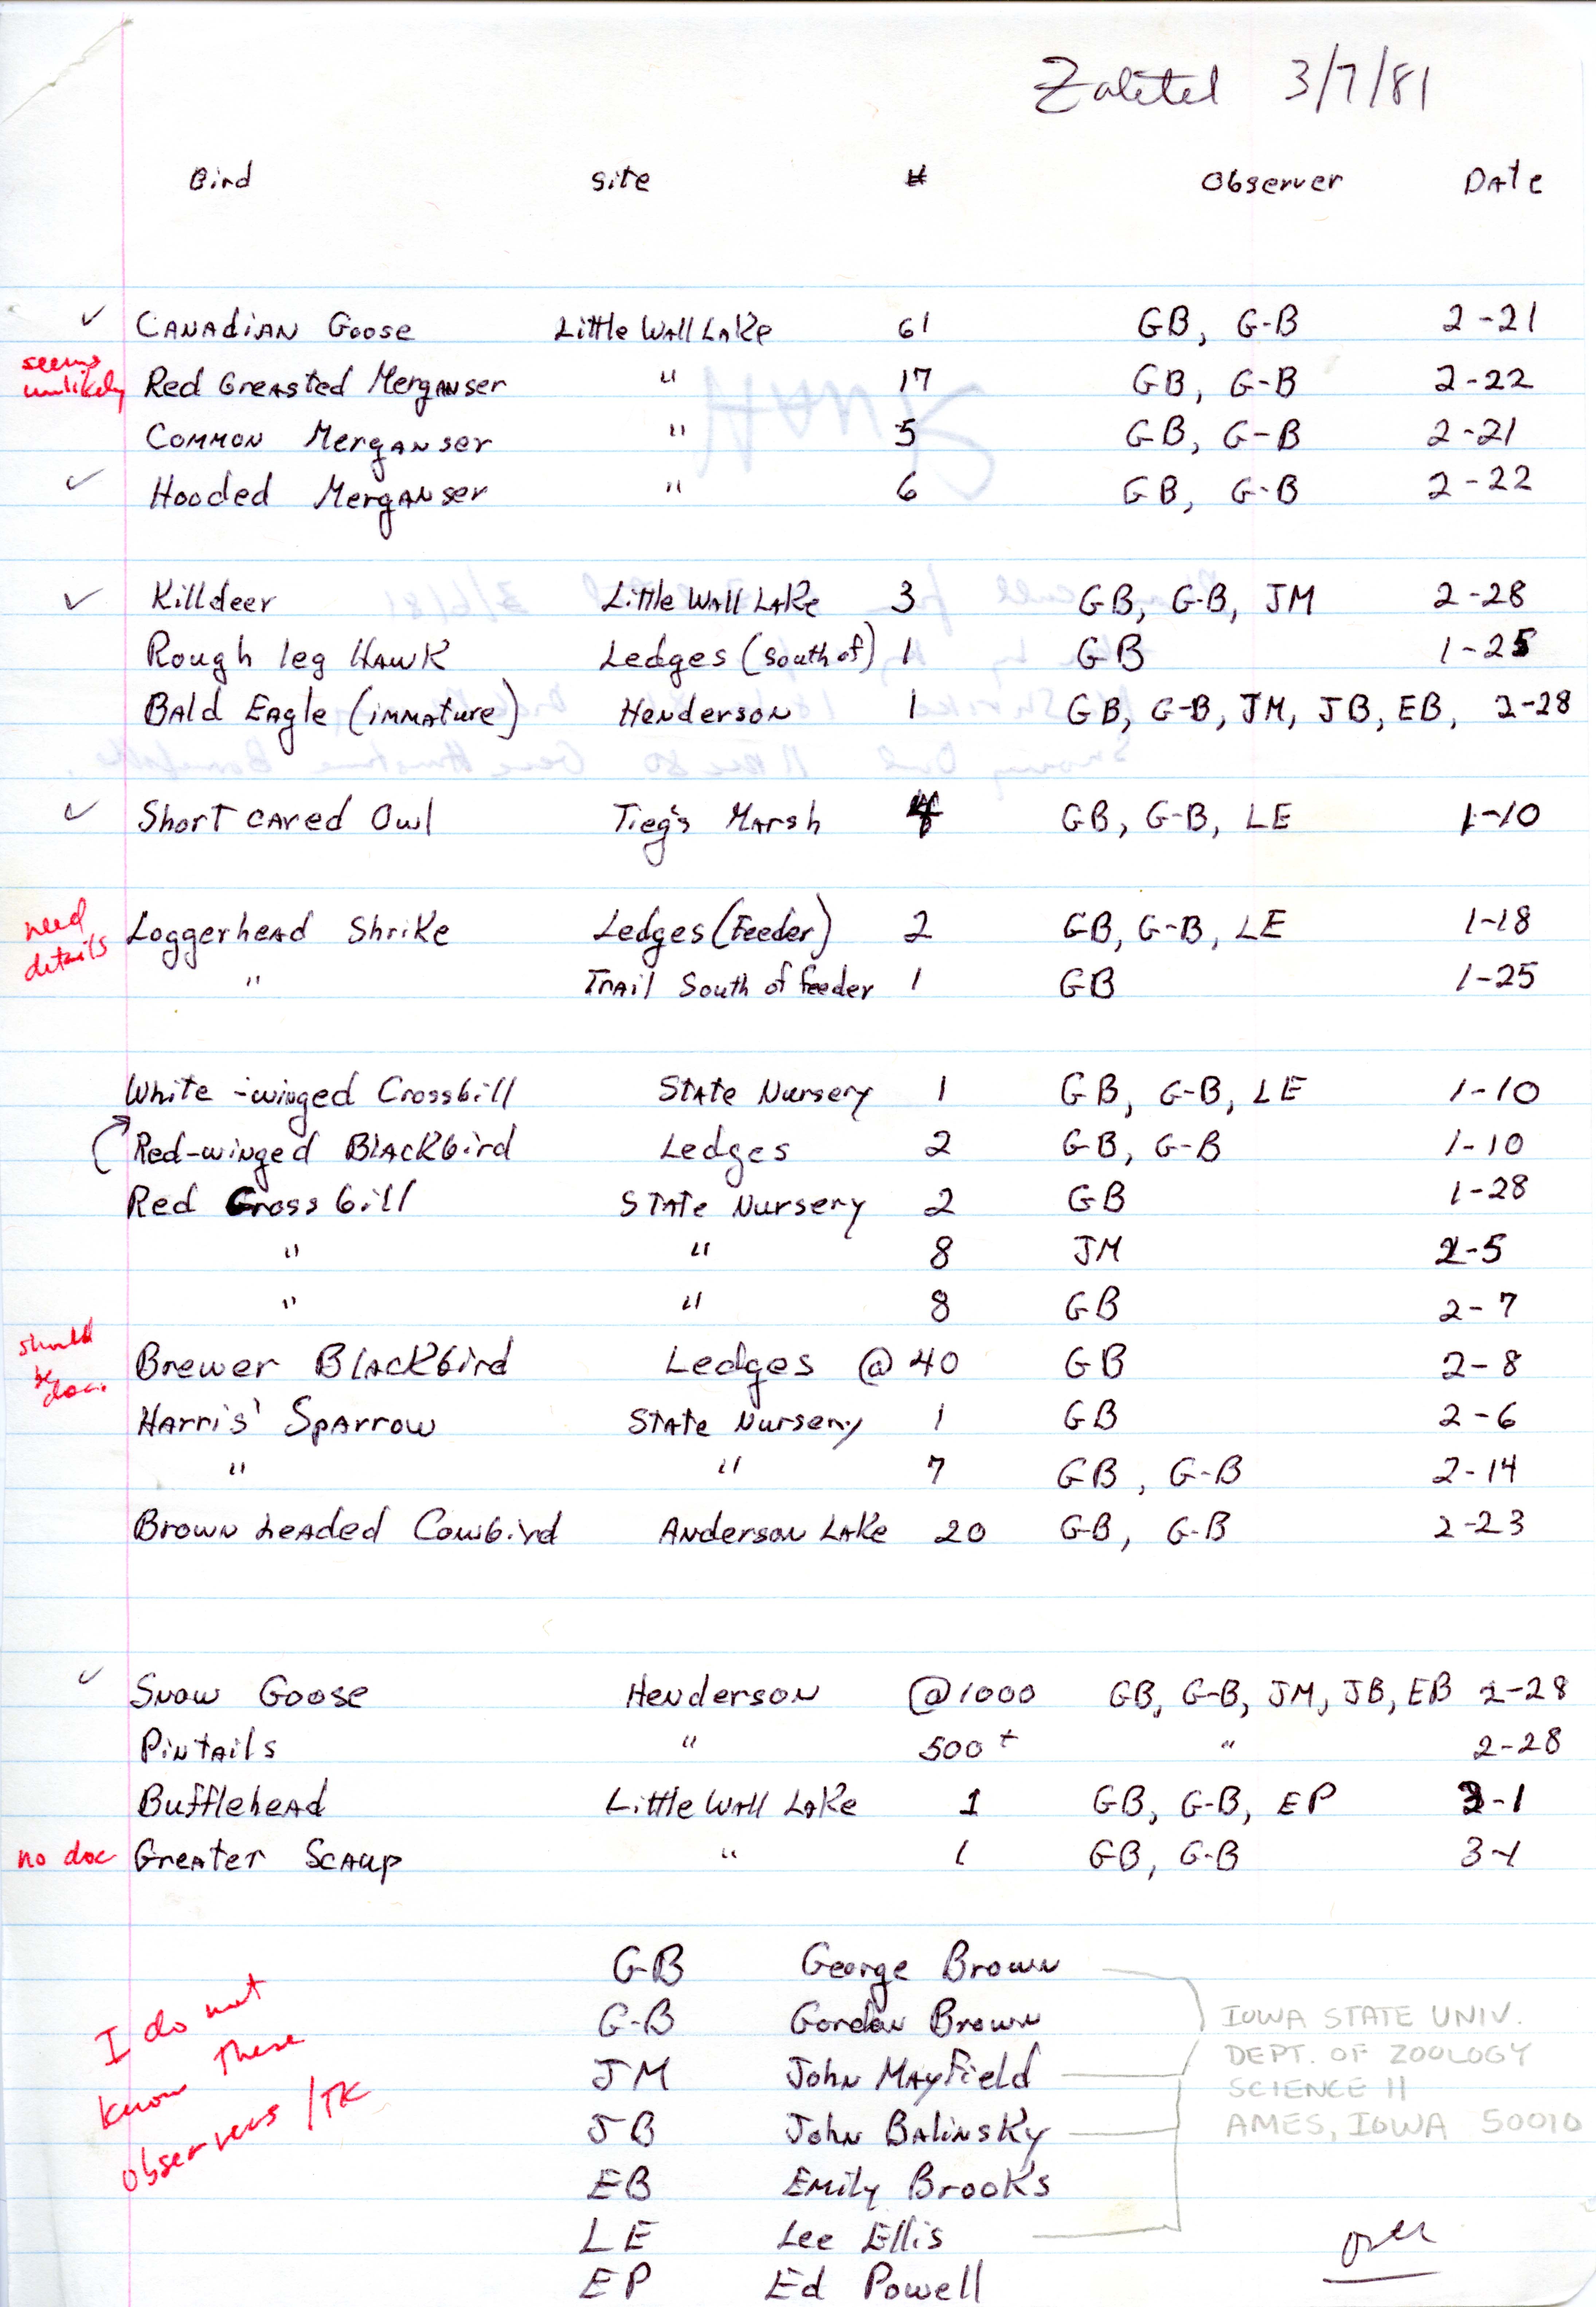 Phone call notes for annotated bird sighting list, March 7, 1981